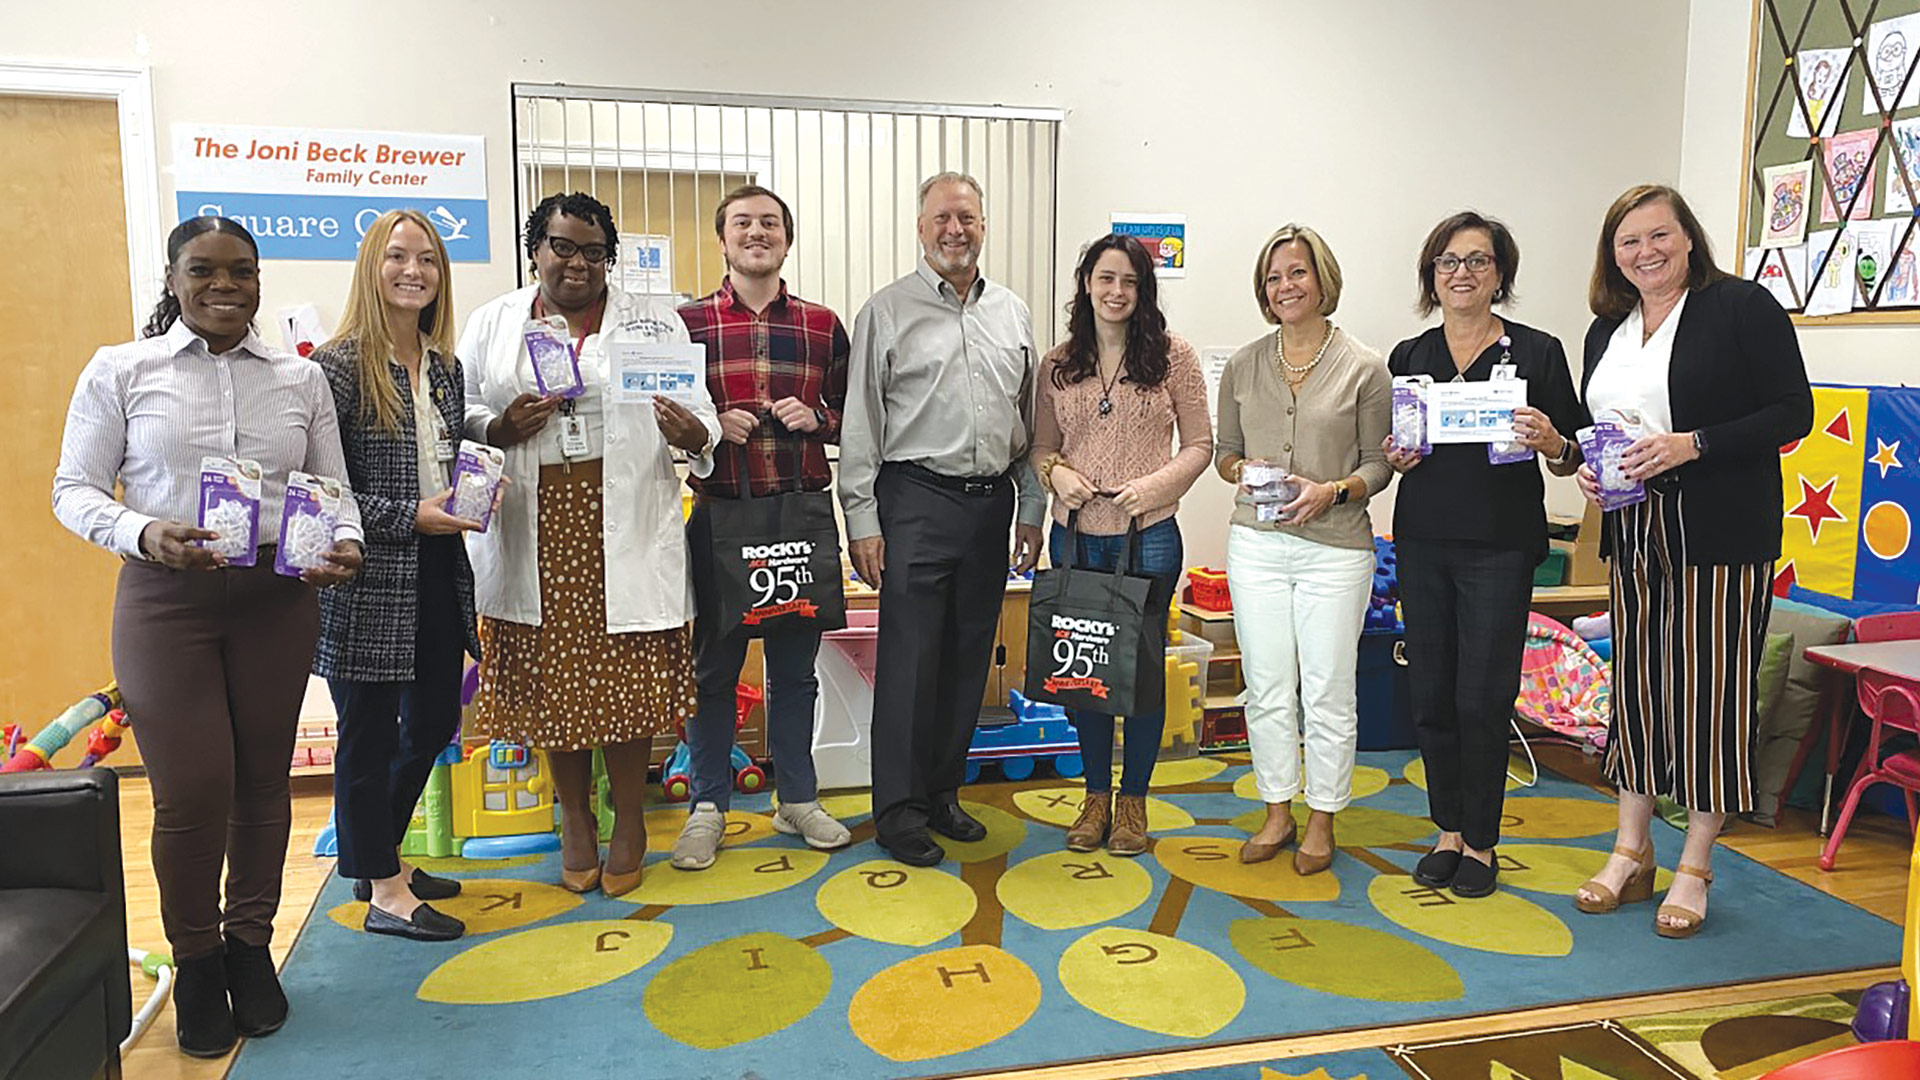 Pictured, from left: Melissa Blissett of Square One; Burdick; Yolanda Marrow of Baystate Health; Jonathan Cosenzi, Rocco Falcone, and Caitlin Petrone of Rocky’s Ace Hardware; Kristine Allard of Square One; Ida Konderwicz of Baystate Health; and Dawn DiStefano of Square One.